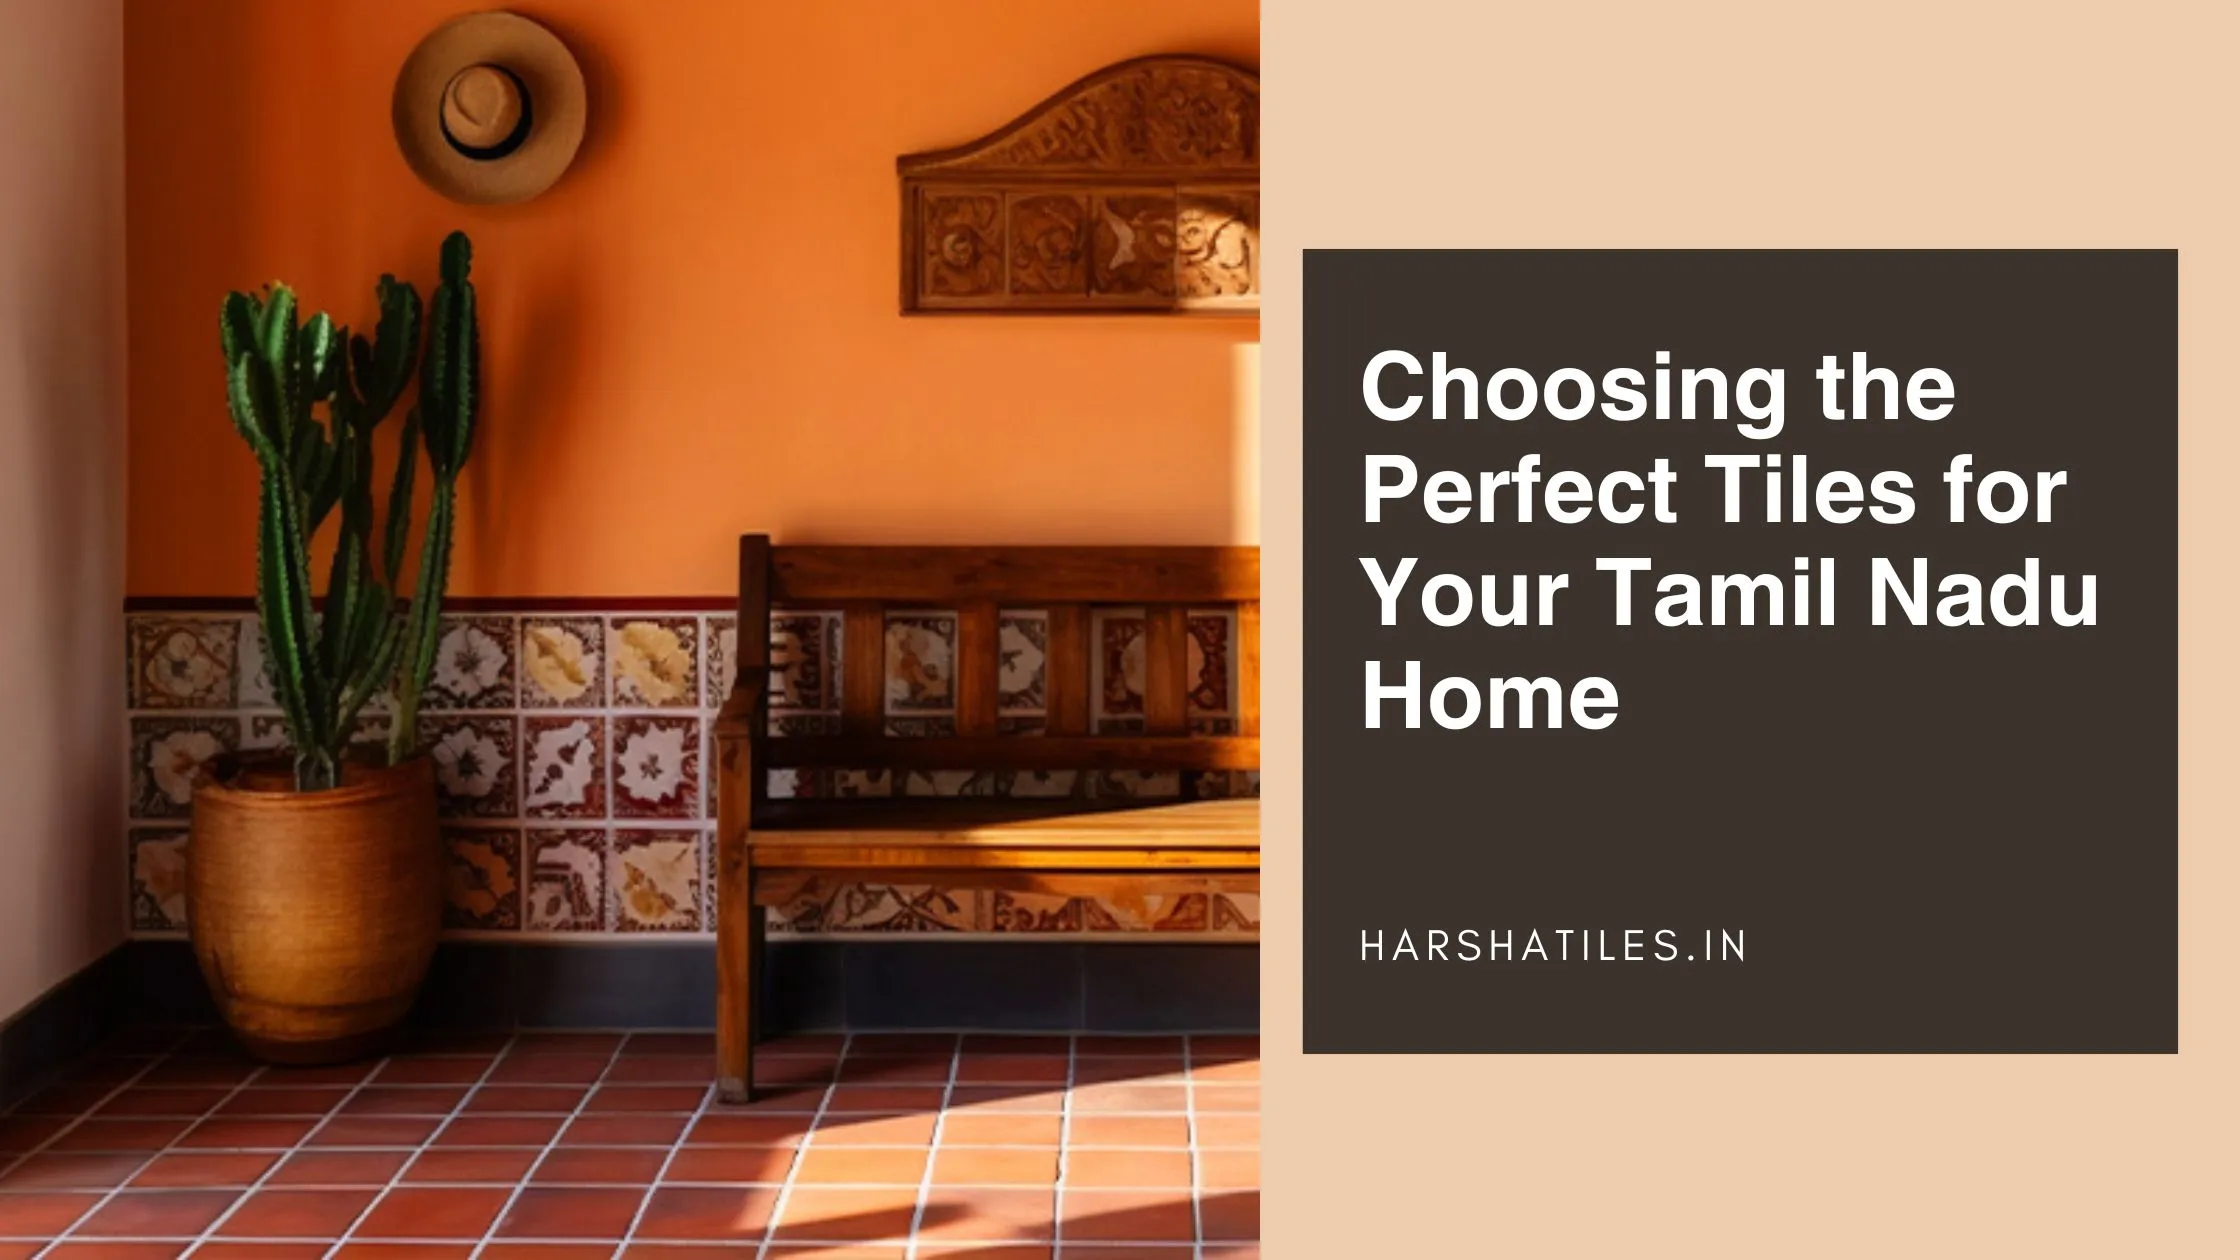 Choosing the Perfect Tiles for Your Tamil Nadu Home